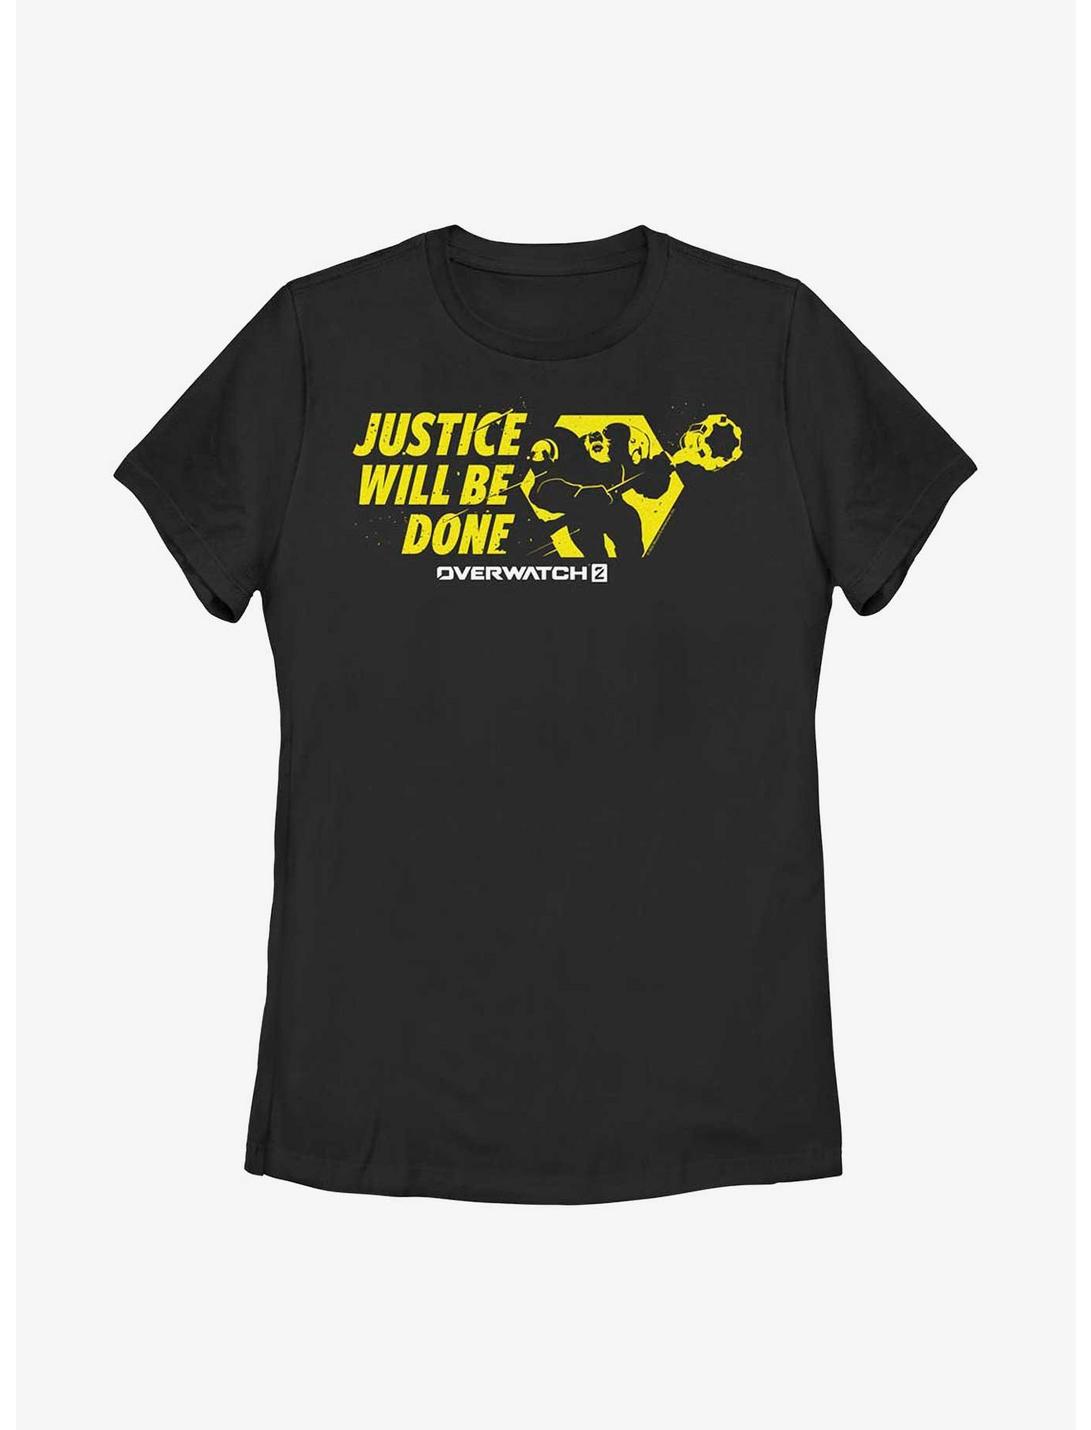 Overwatch 2 Reinhardt Justice Will Be Done Womens T-Shirt, BLACK, hi-res